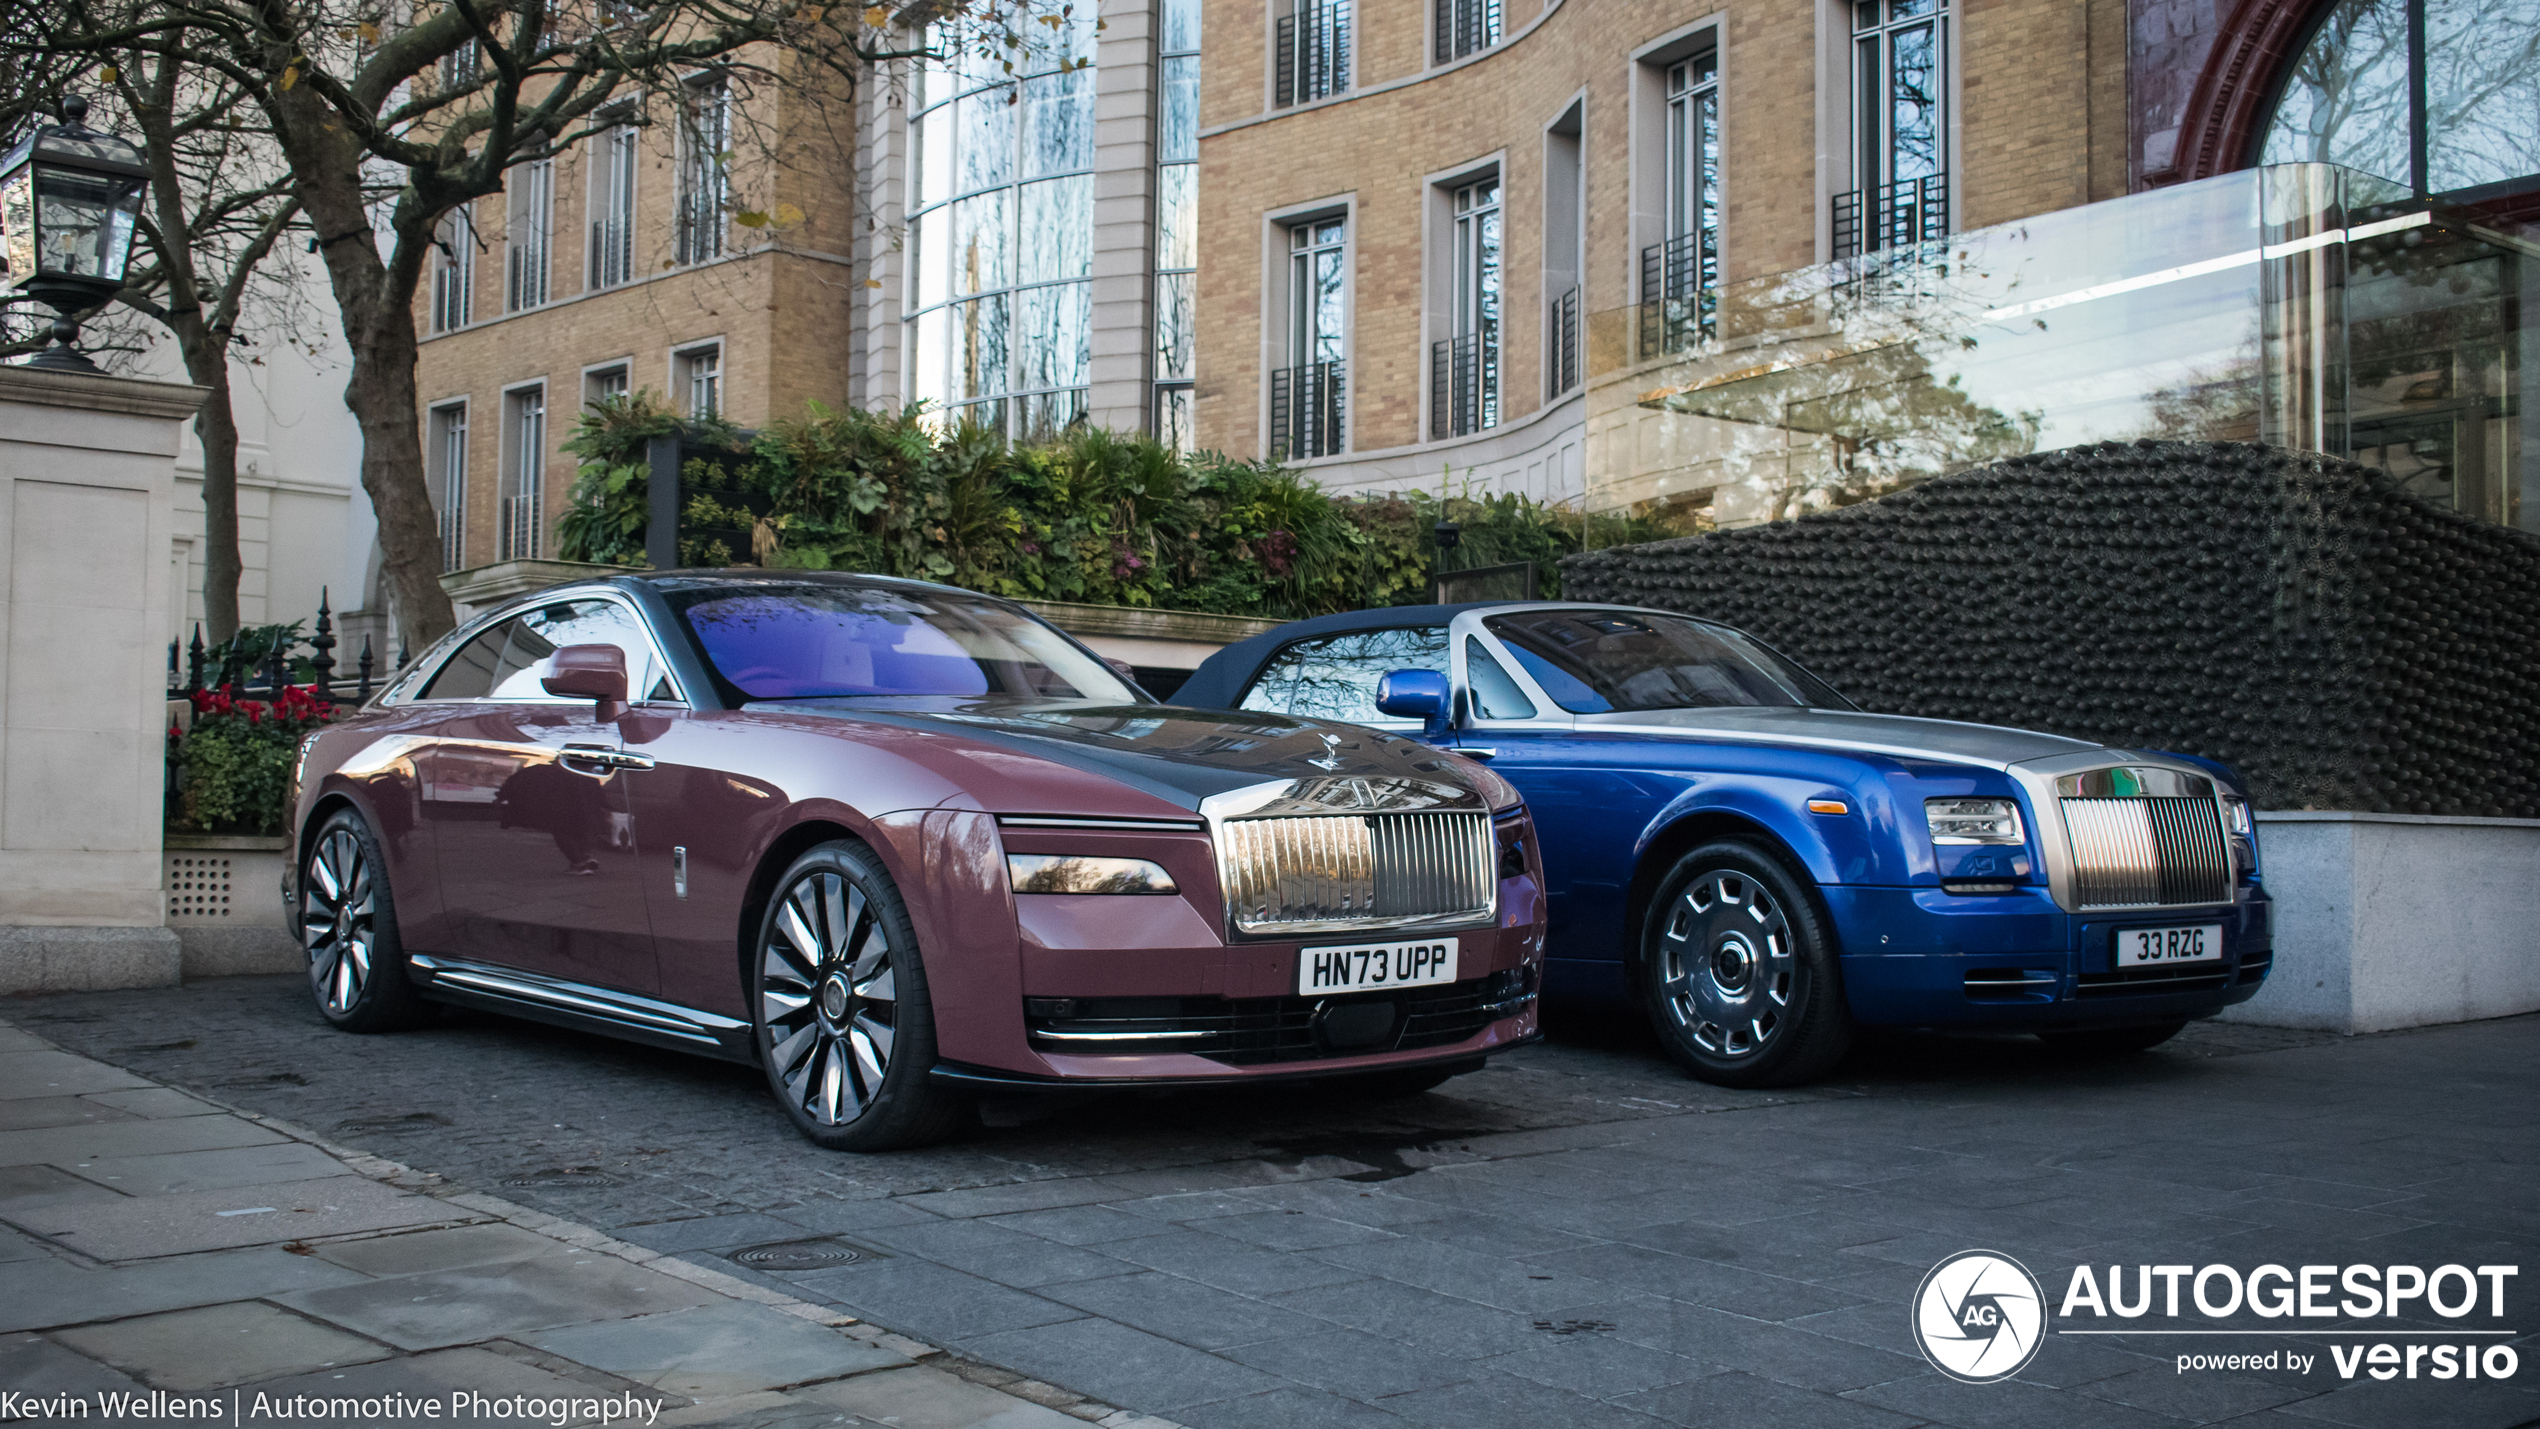 A Rolls-Royce of the old and the new generation